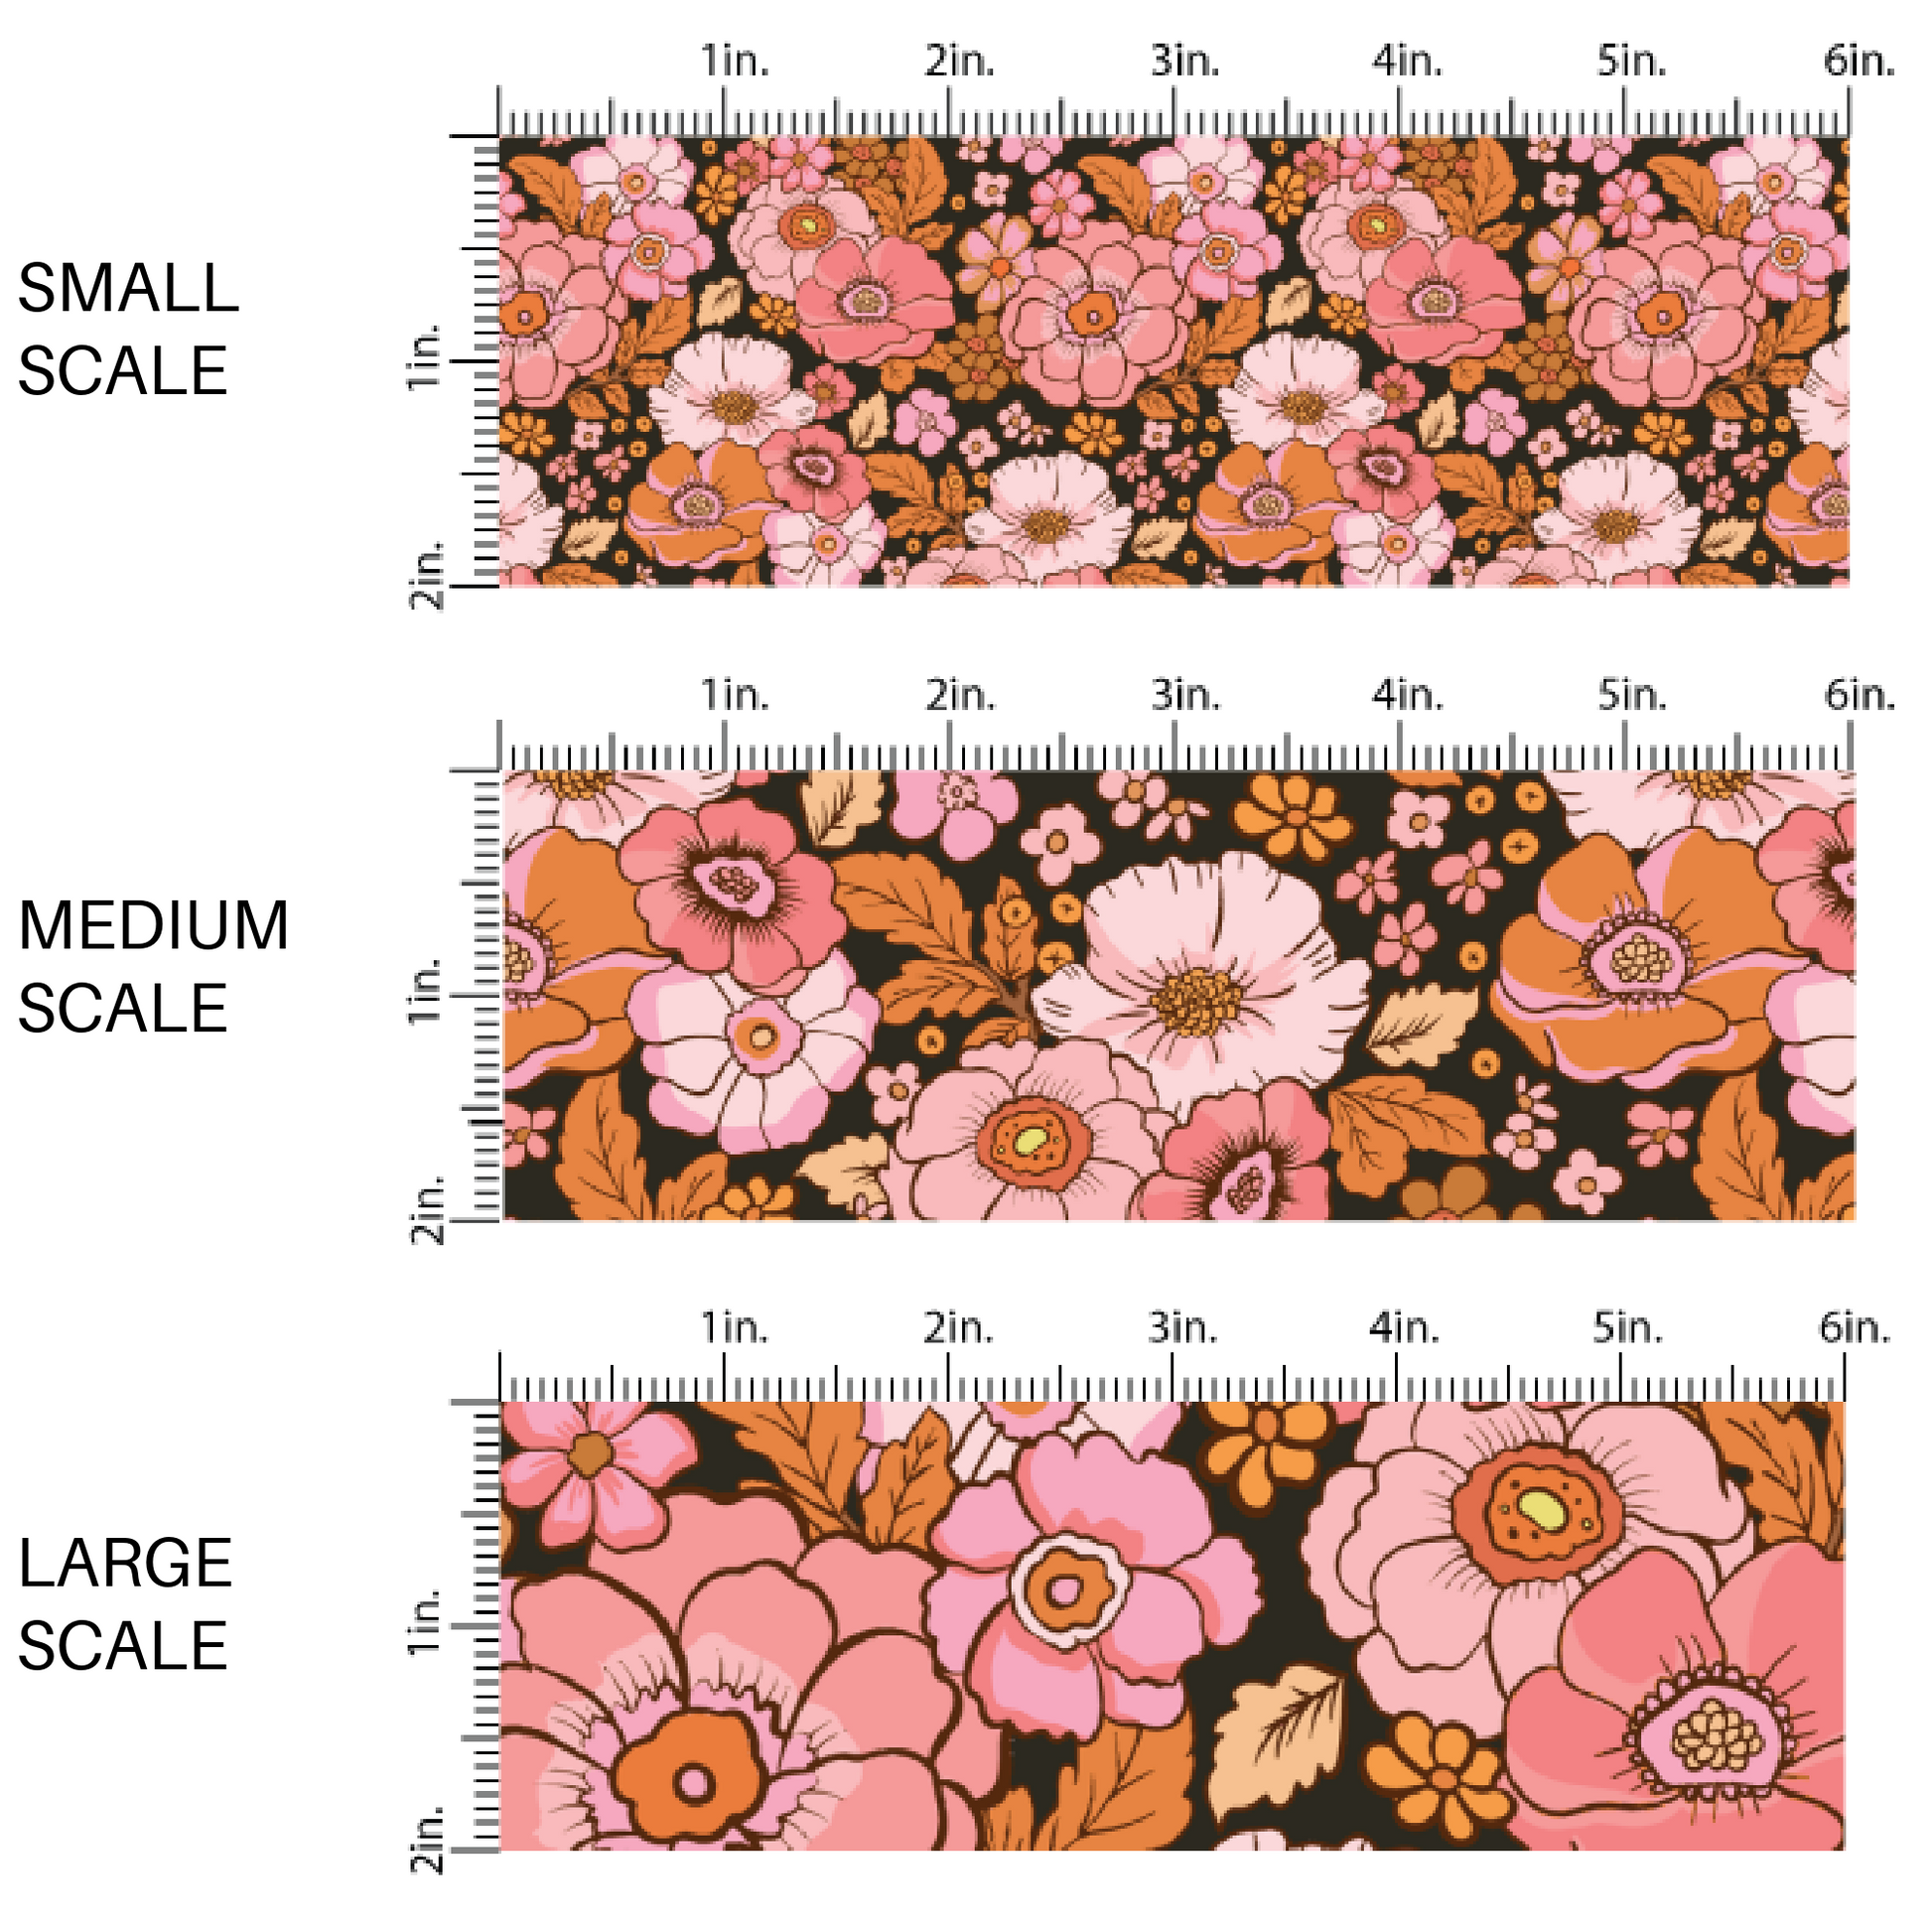 Black fabric by the yard scaled image guide with orange and pink florals.